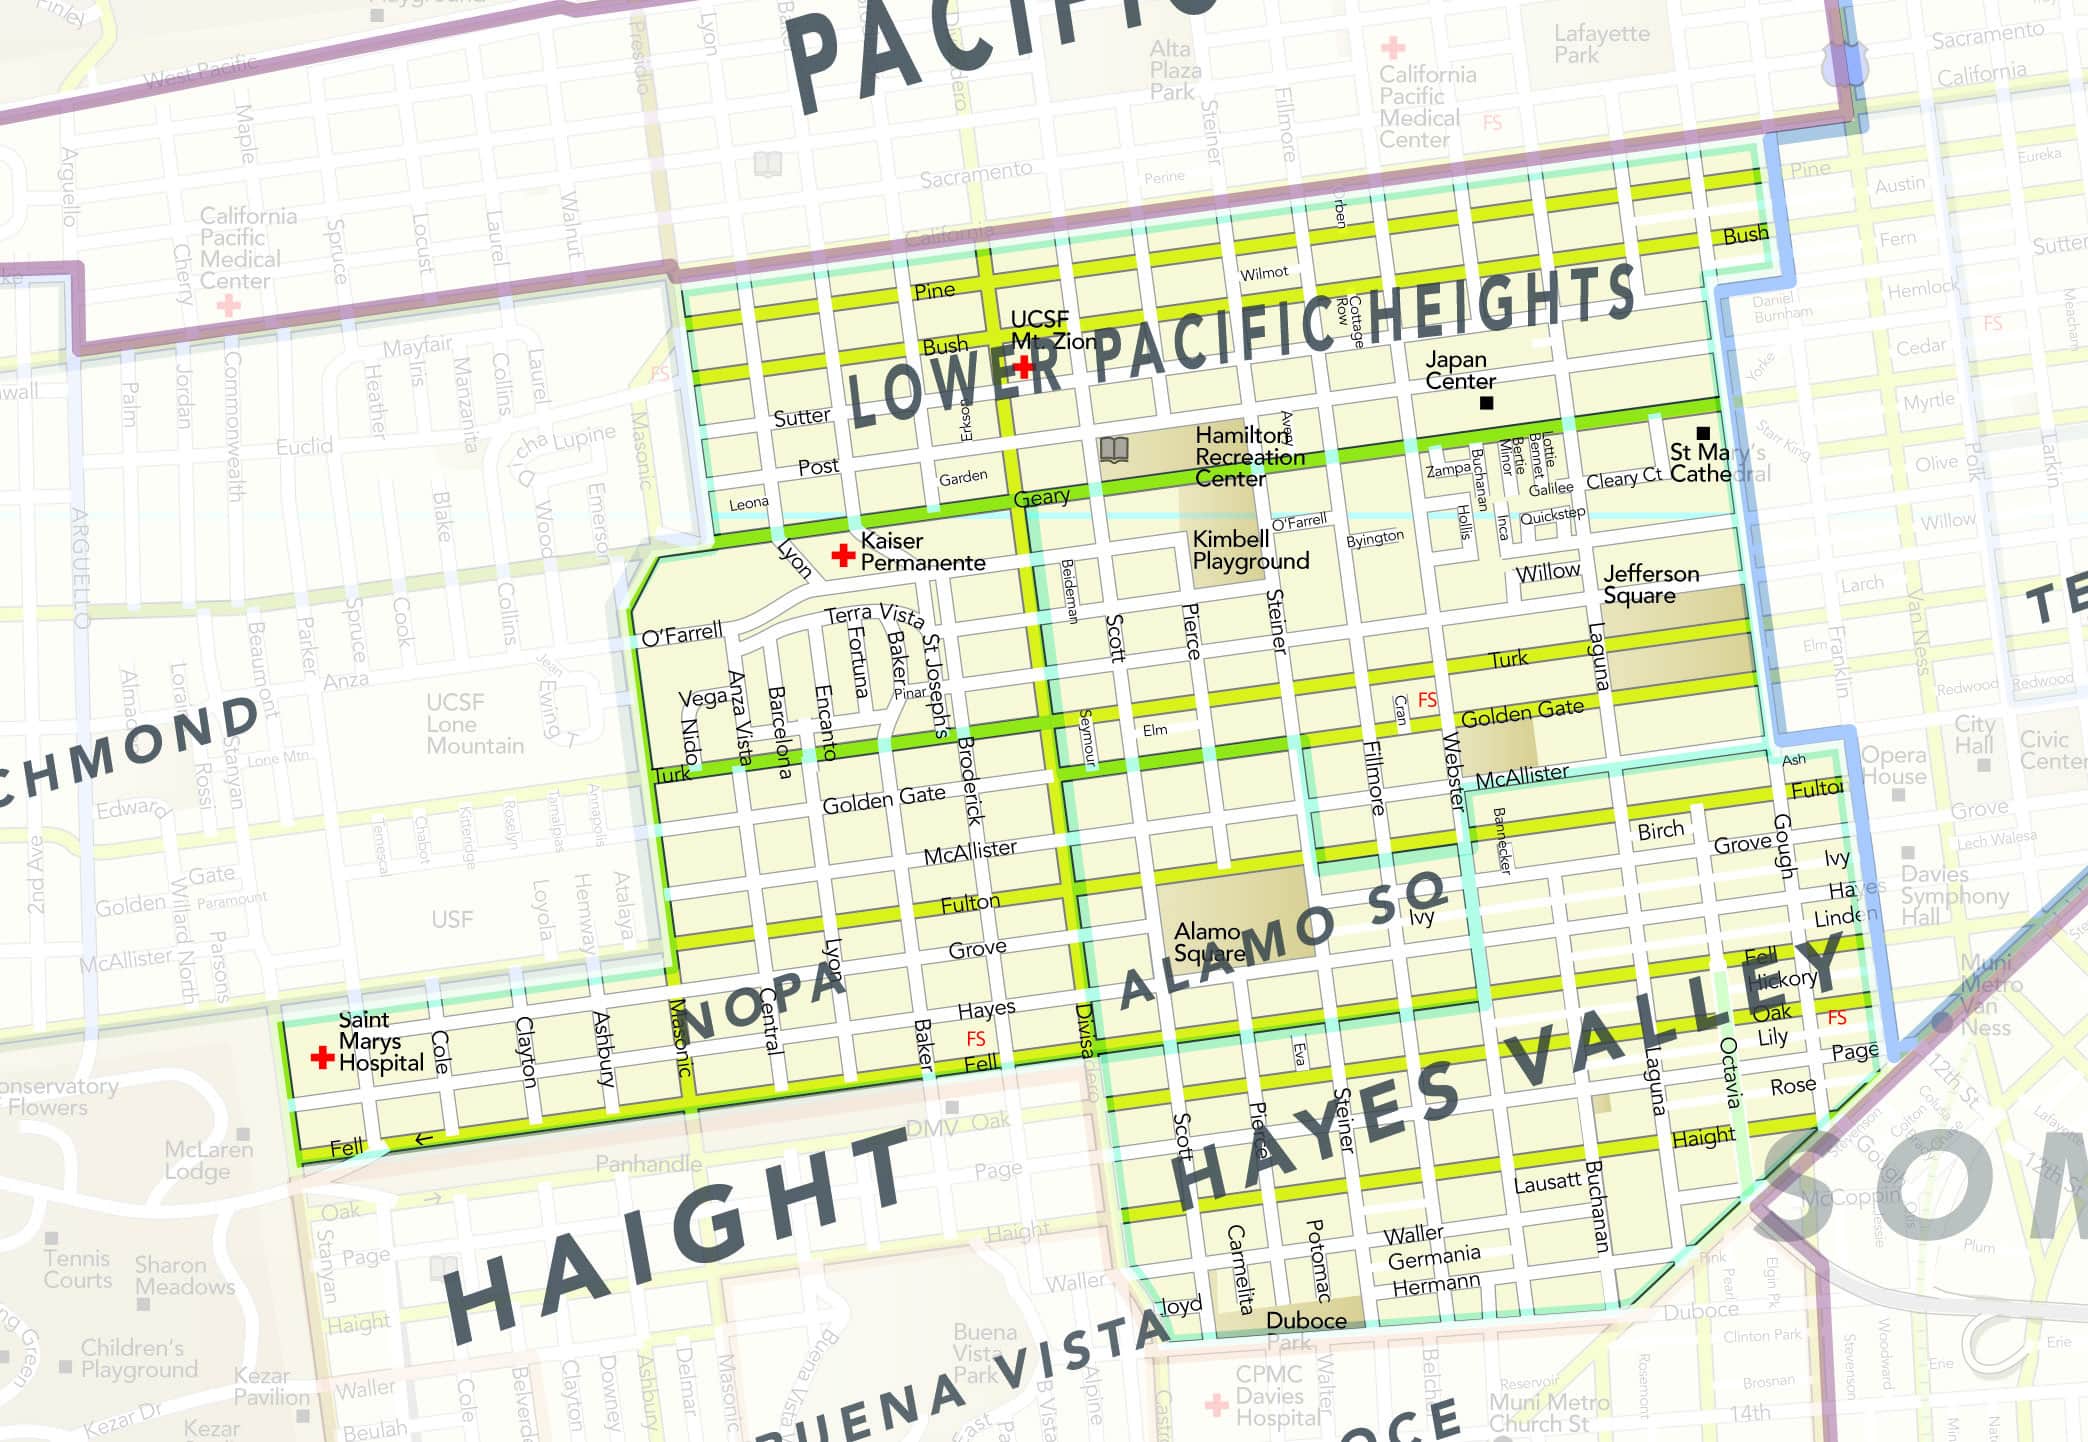 District 6: Hayes Valley, Alamo the Haight and NoPa